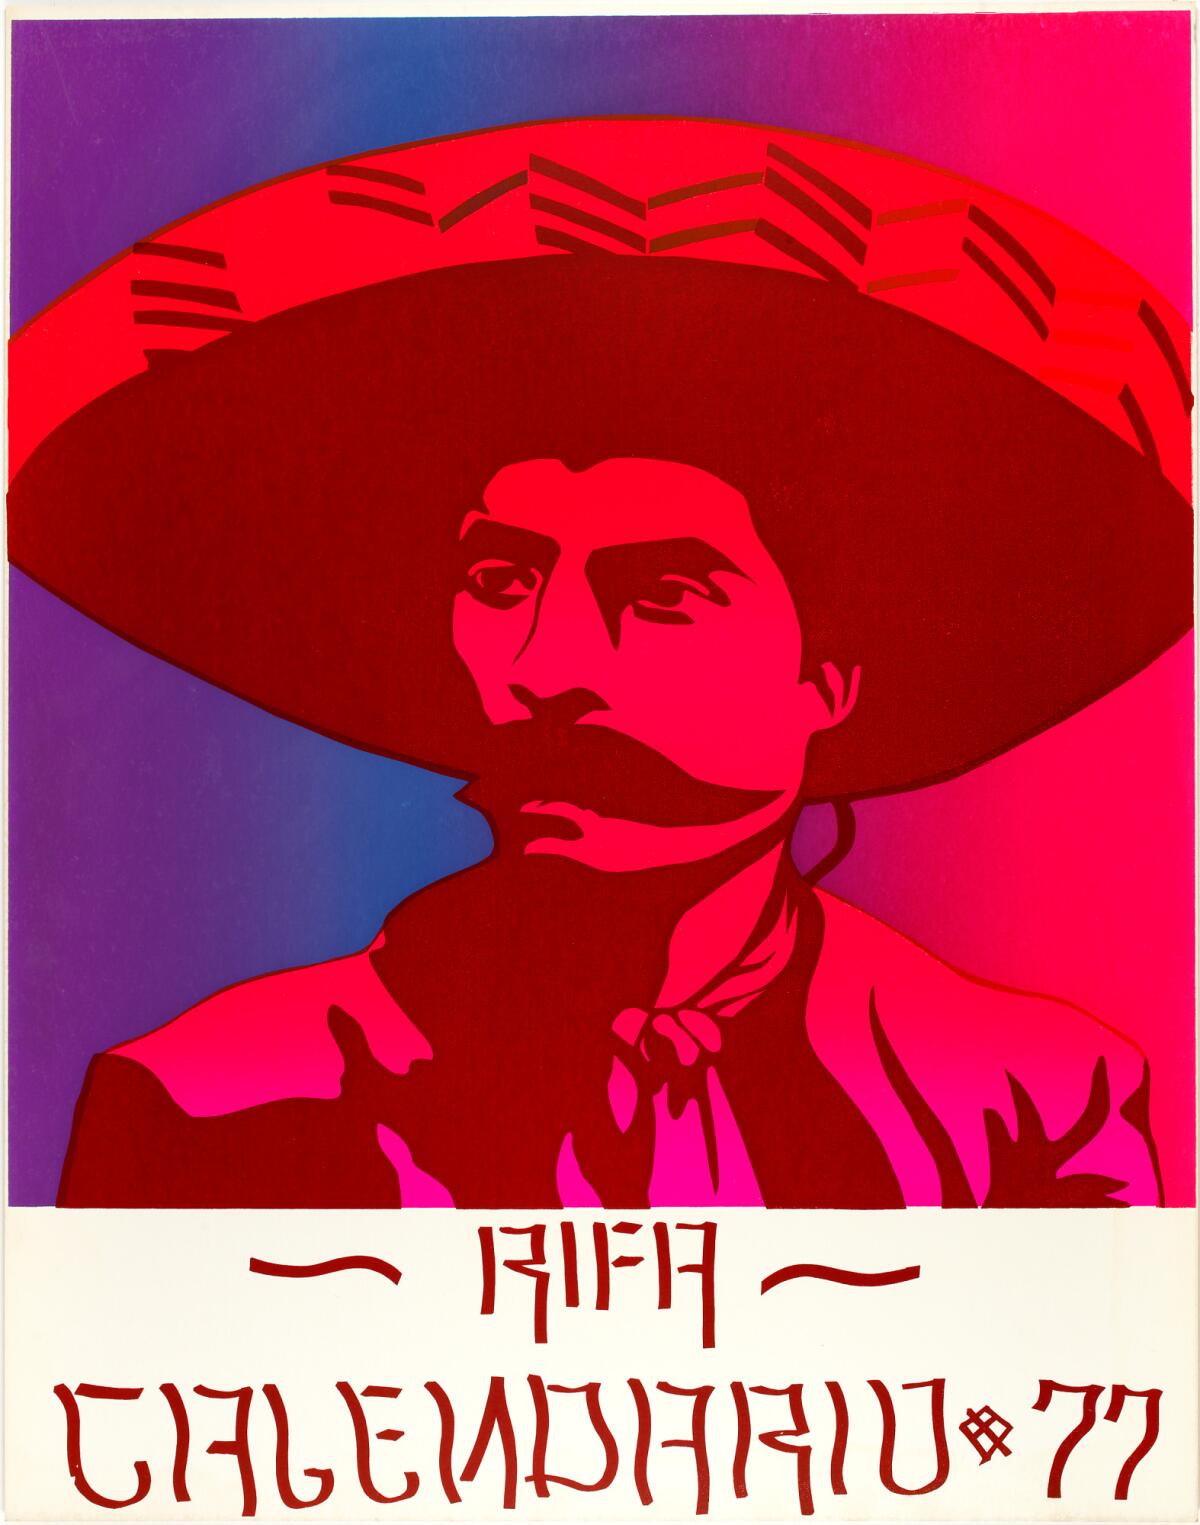 A poster shows Emiliano Zapata rendered in a stylized graphic design printed in shades of red and purple